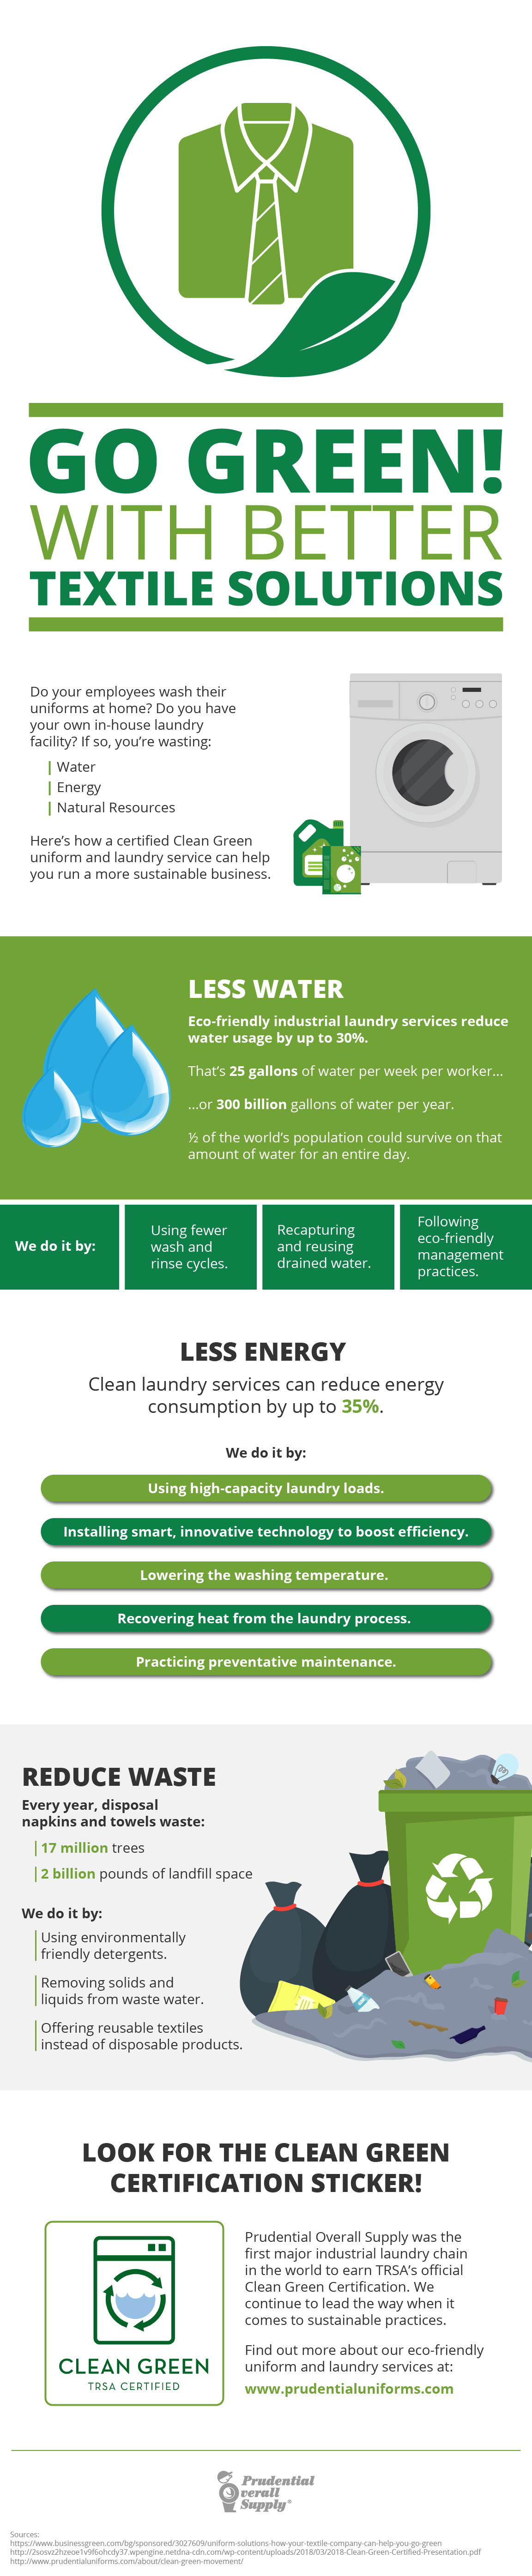 Go Green! With Better Textile Solutions